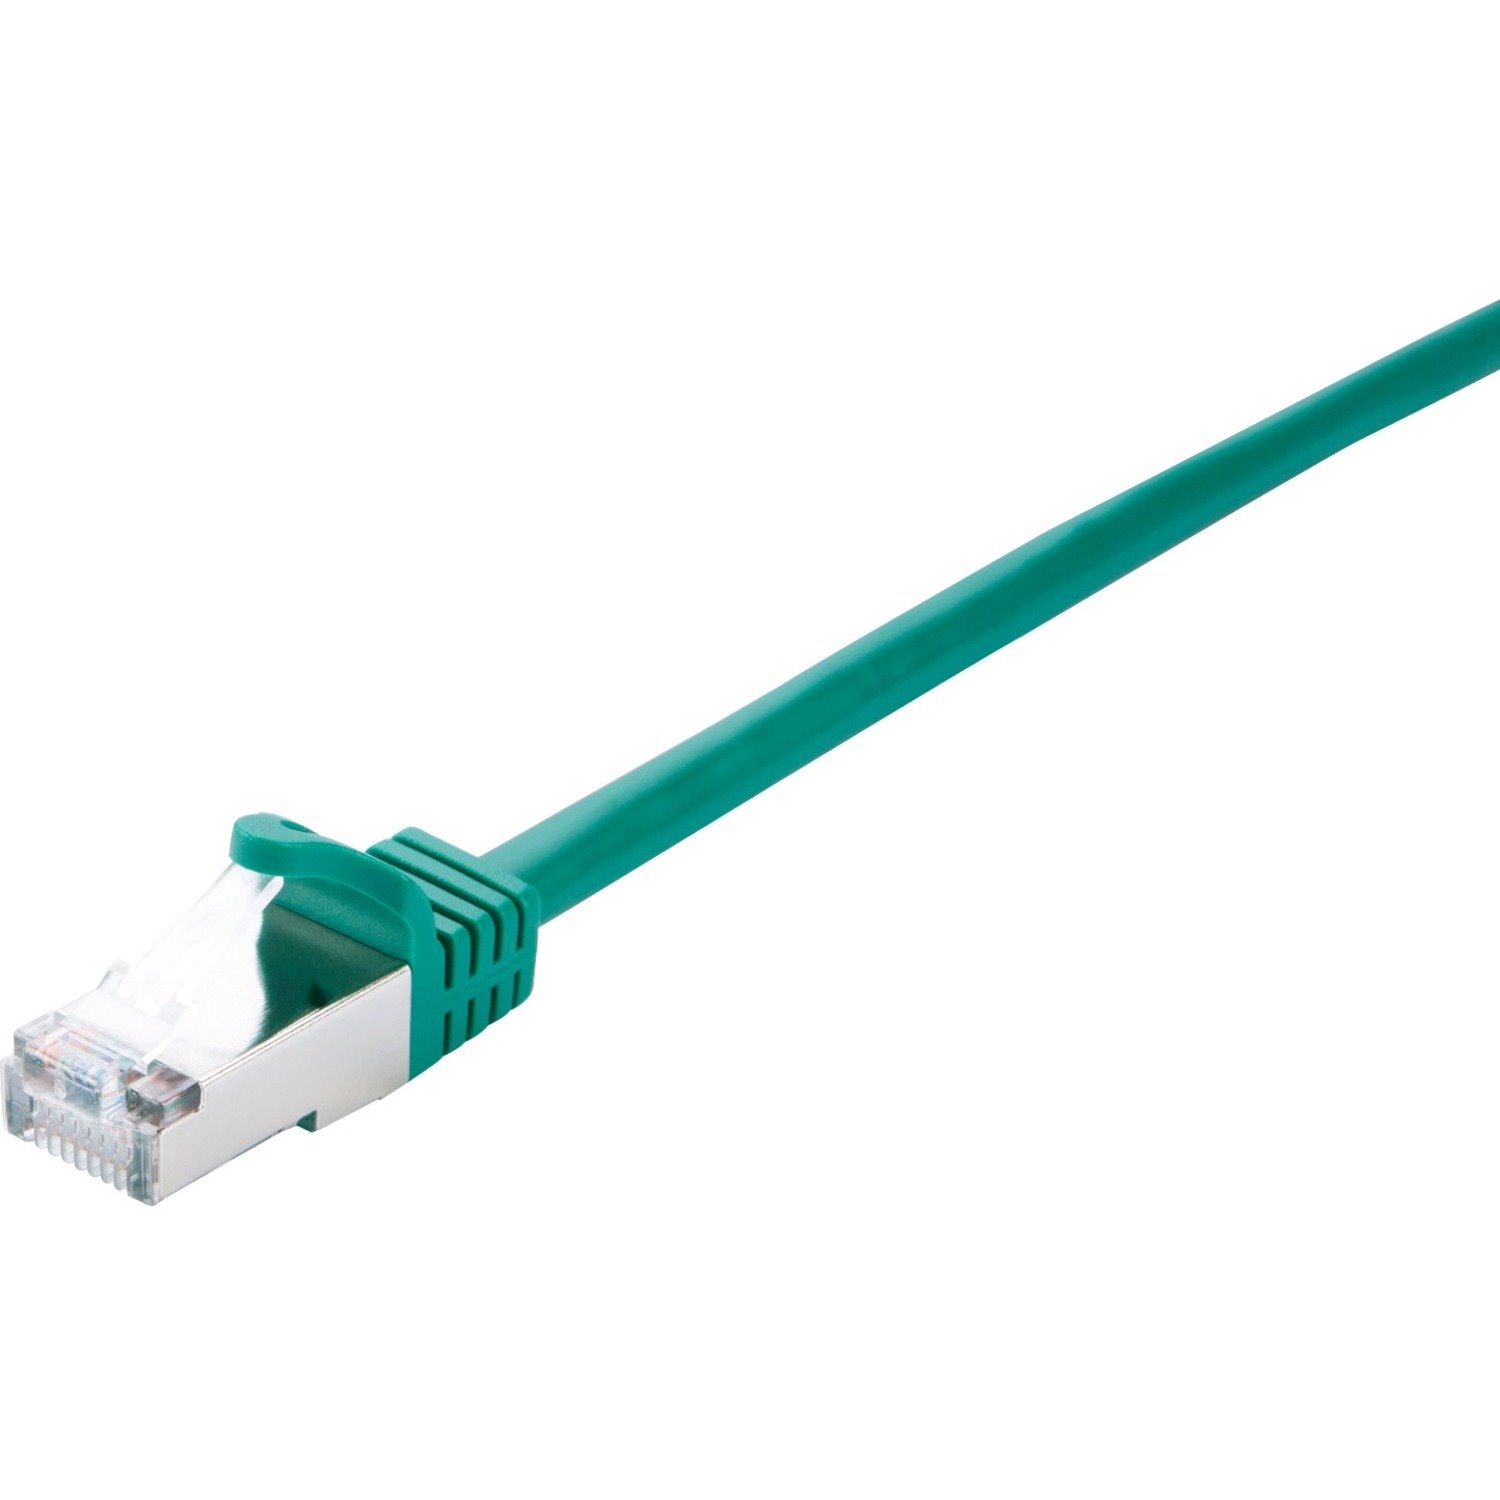 V7 V7CAT6STP-05M-GRN-1E 5 m Category 6 Network Cable for Modem, Patch Panel, Network Card